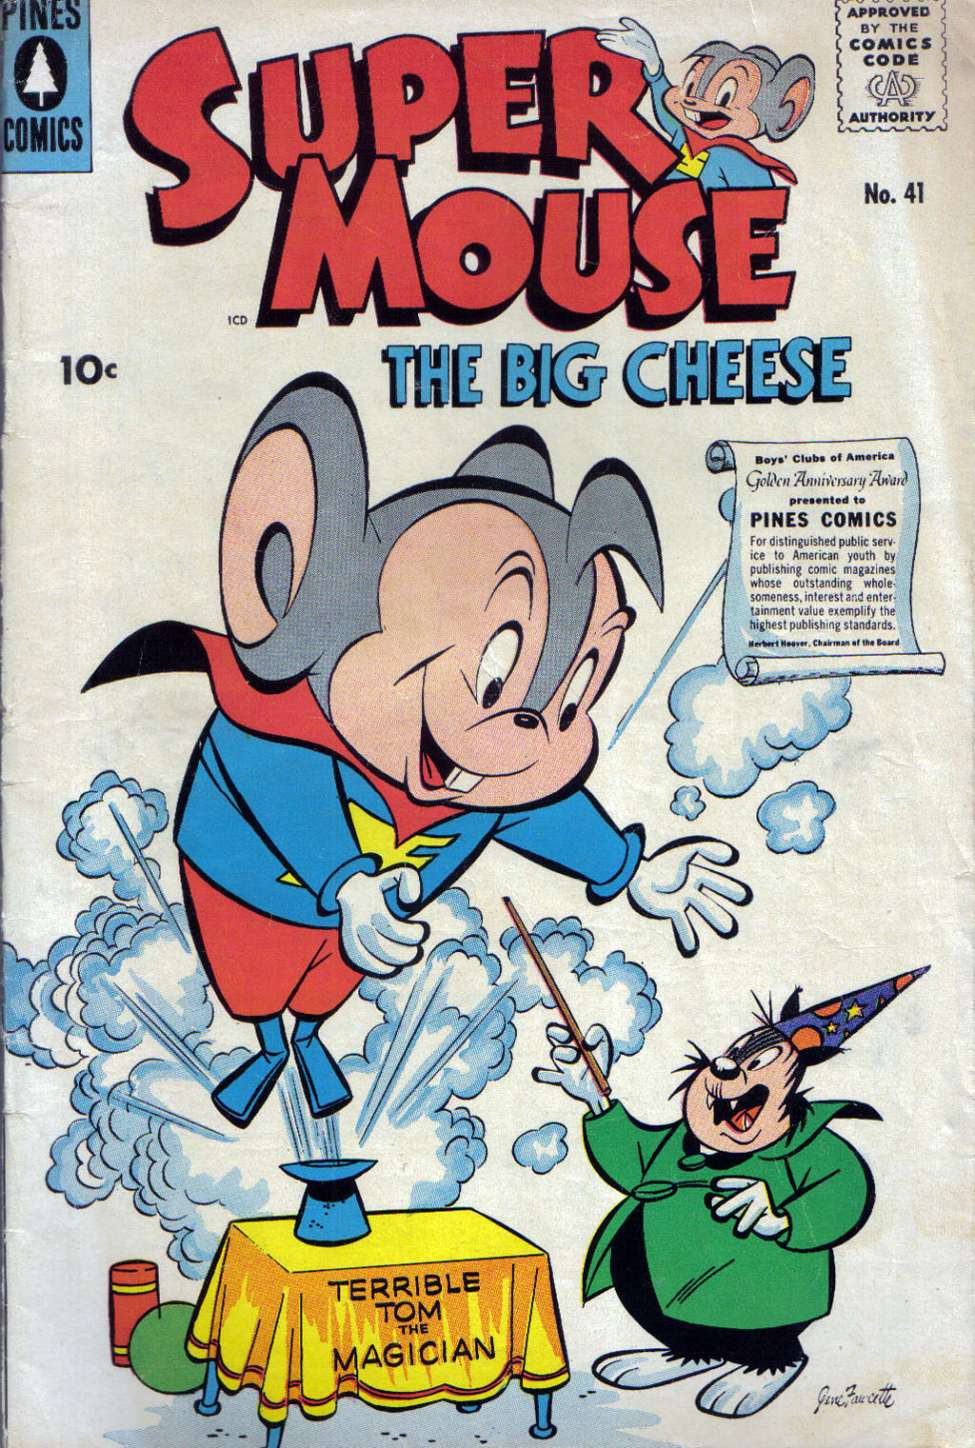 Book Cover For Supermouse 41 - Version 1